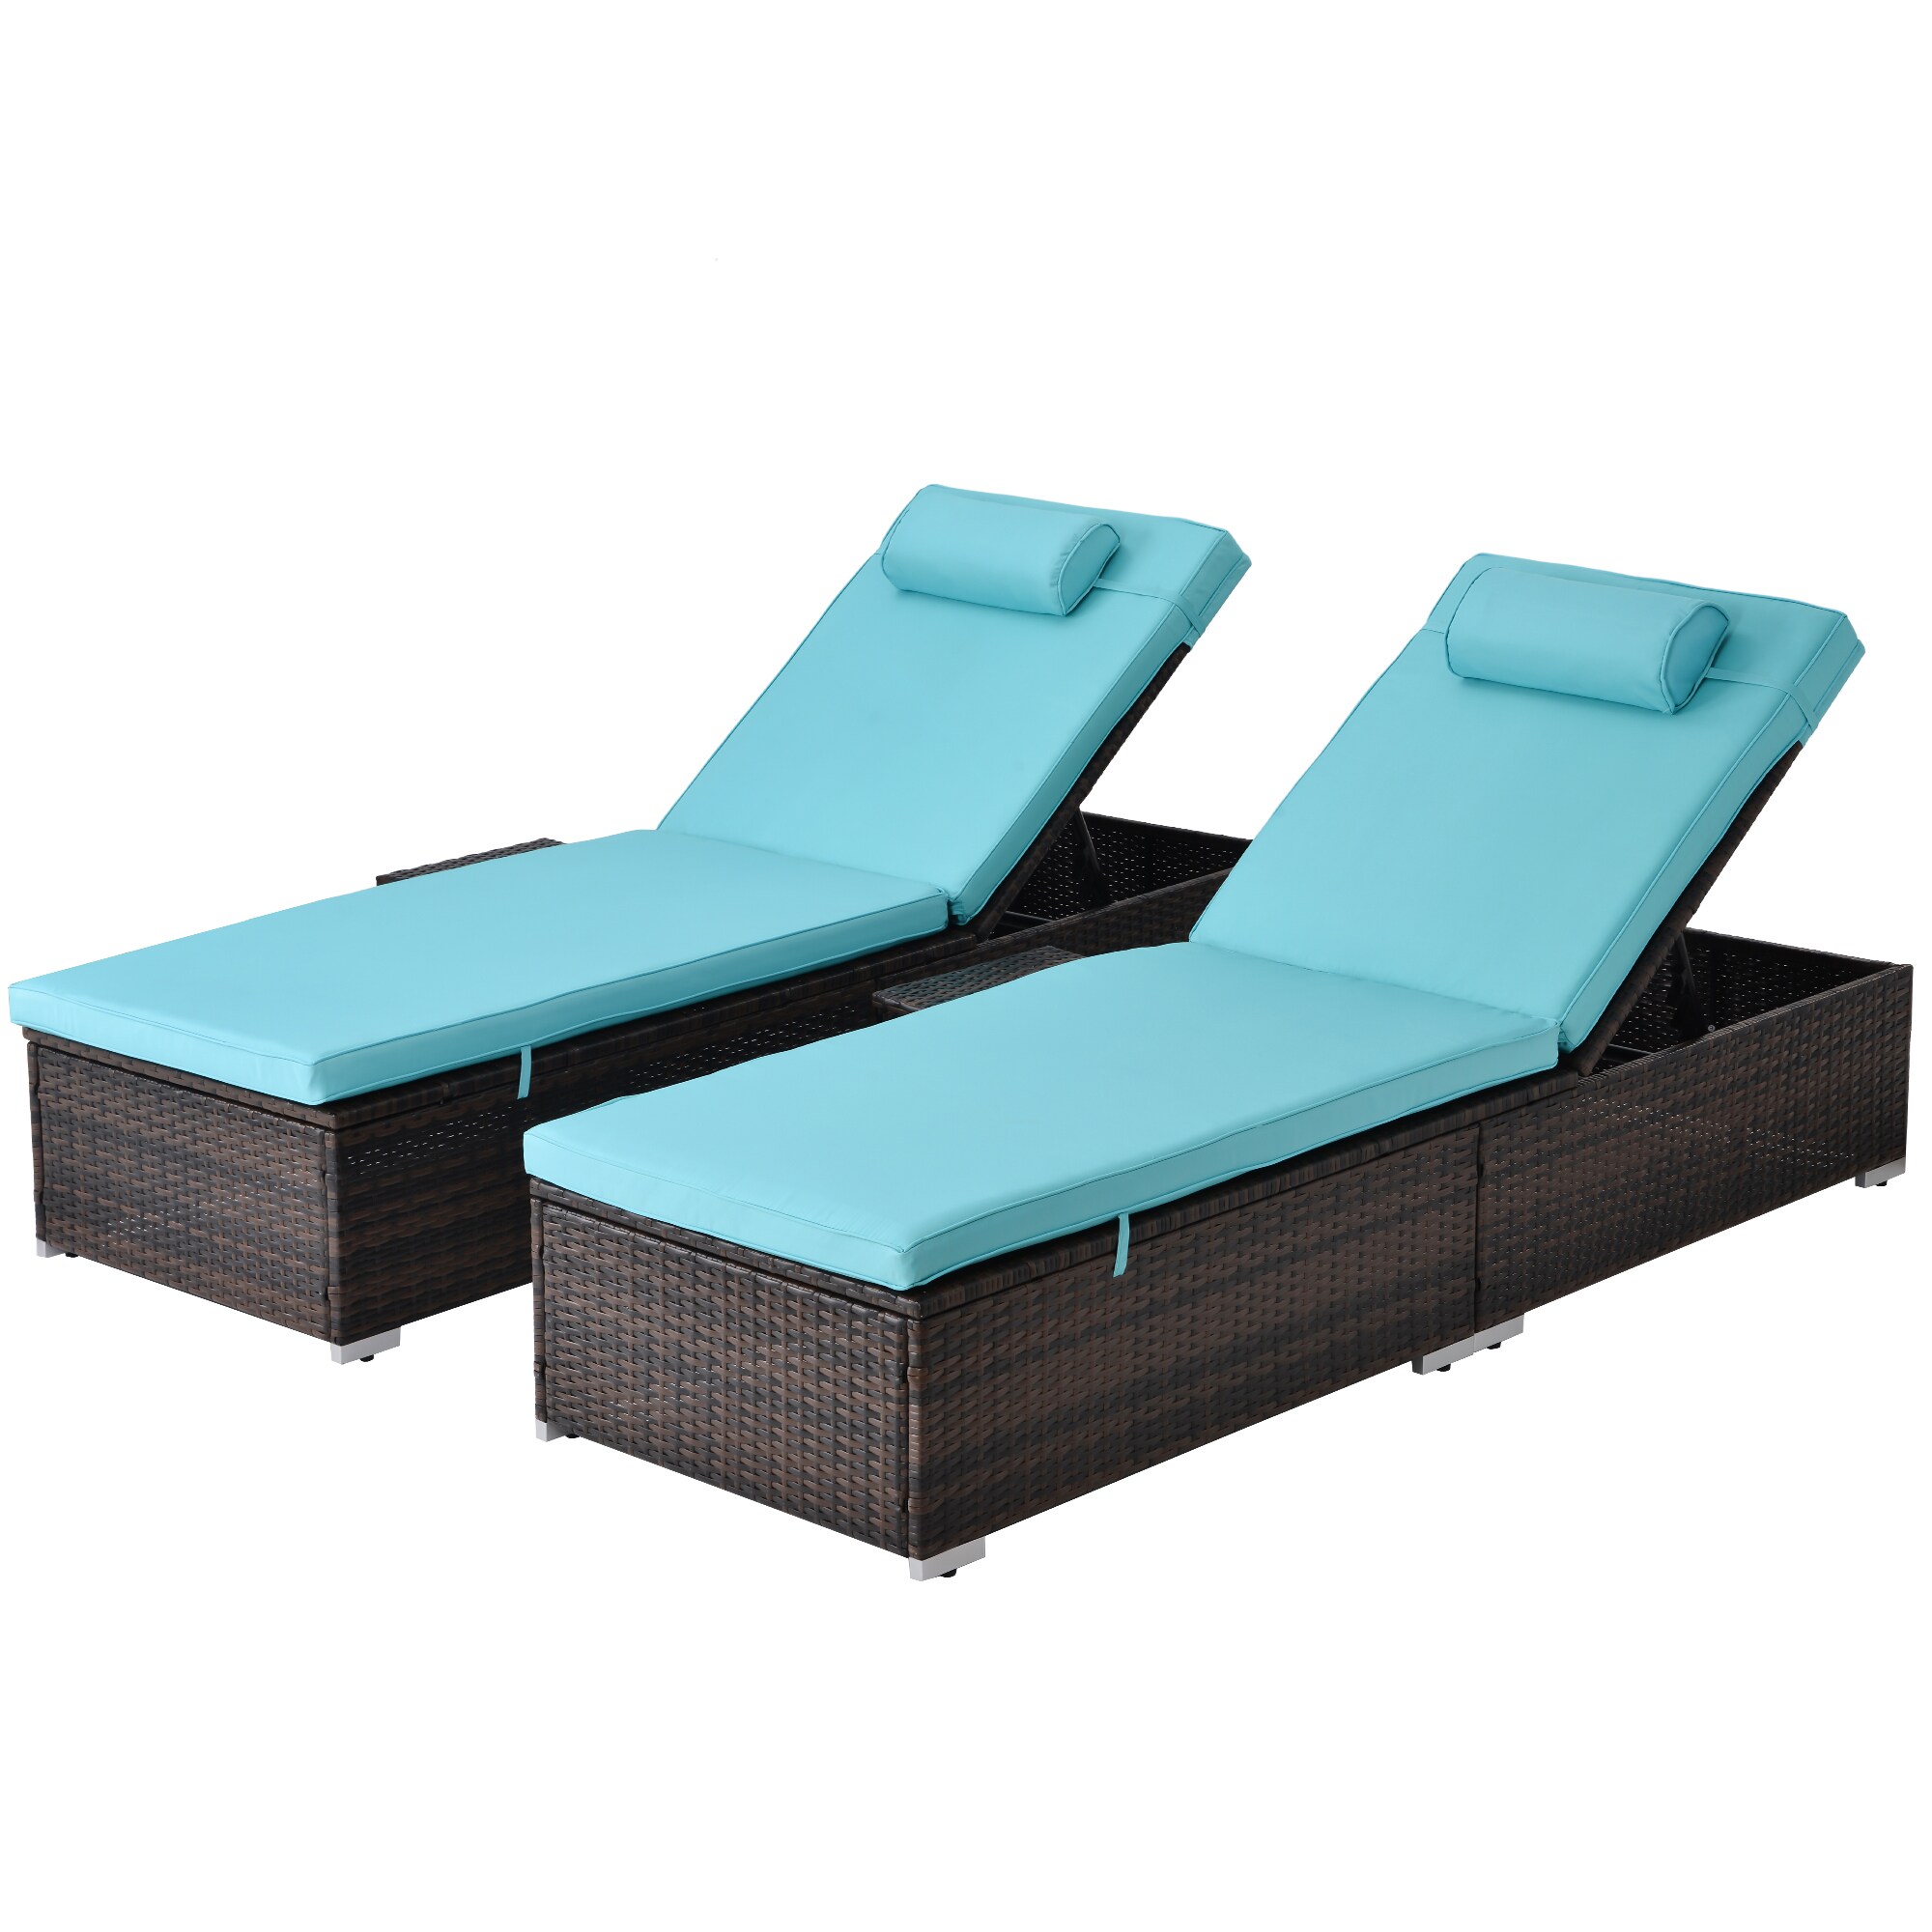 3PCS Adjustable Chaise Lounge Chairs Set Outdoor Patio Pool Garden Furniture US 